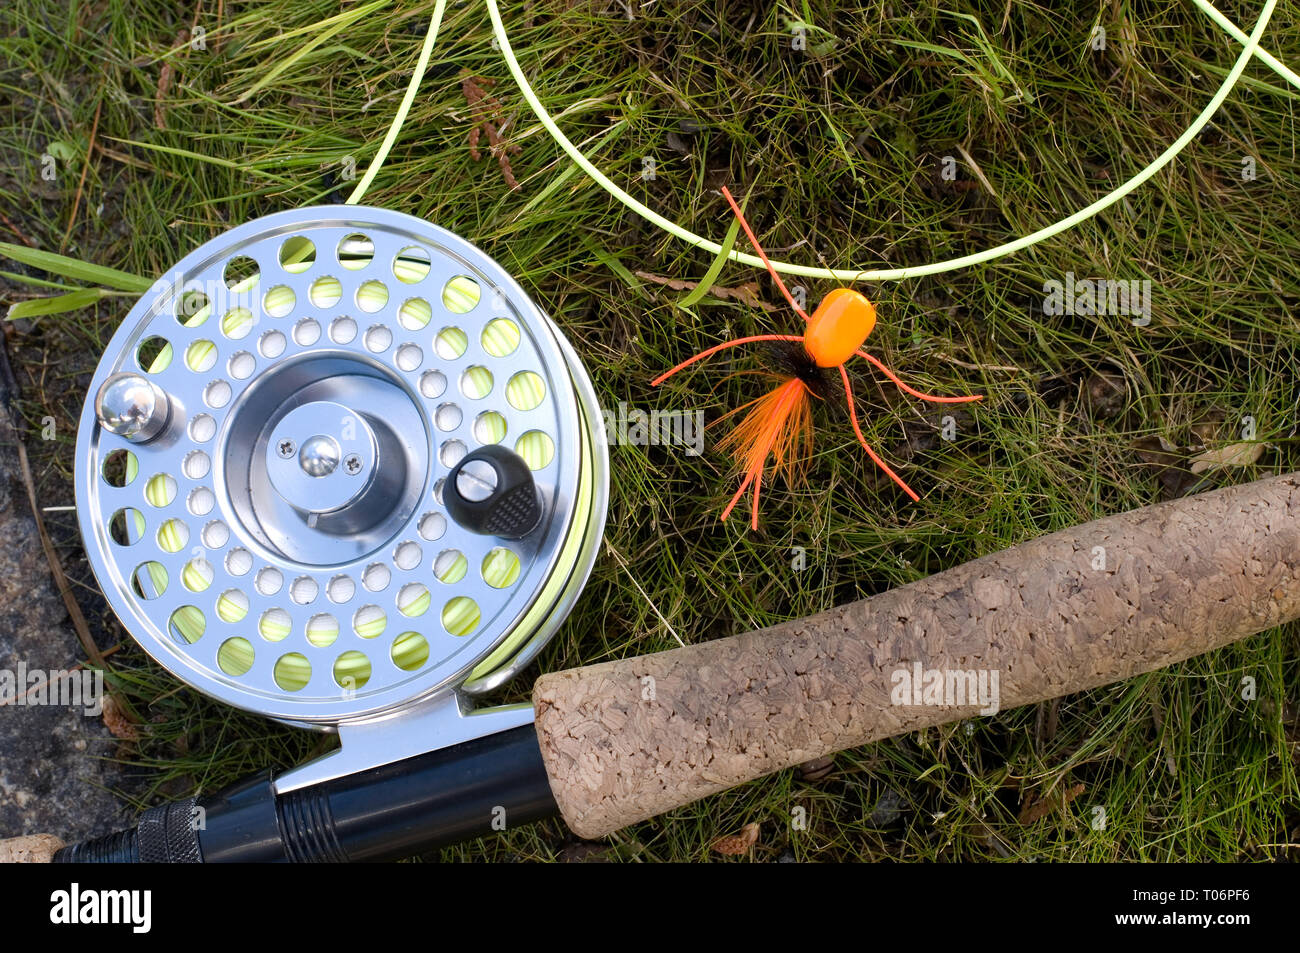 https://c8.alamy.com/comp/T06PF6/fly-fishing-rod-and-reel-with-orange-spider-lure-on-wet-grass-T06PF6.jpg